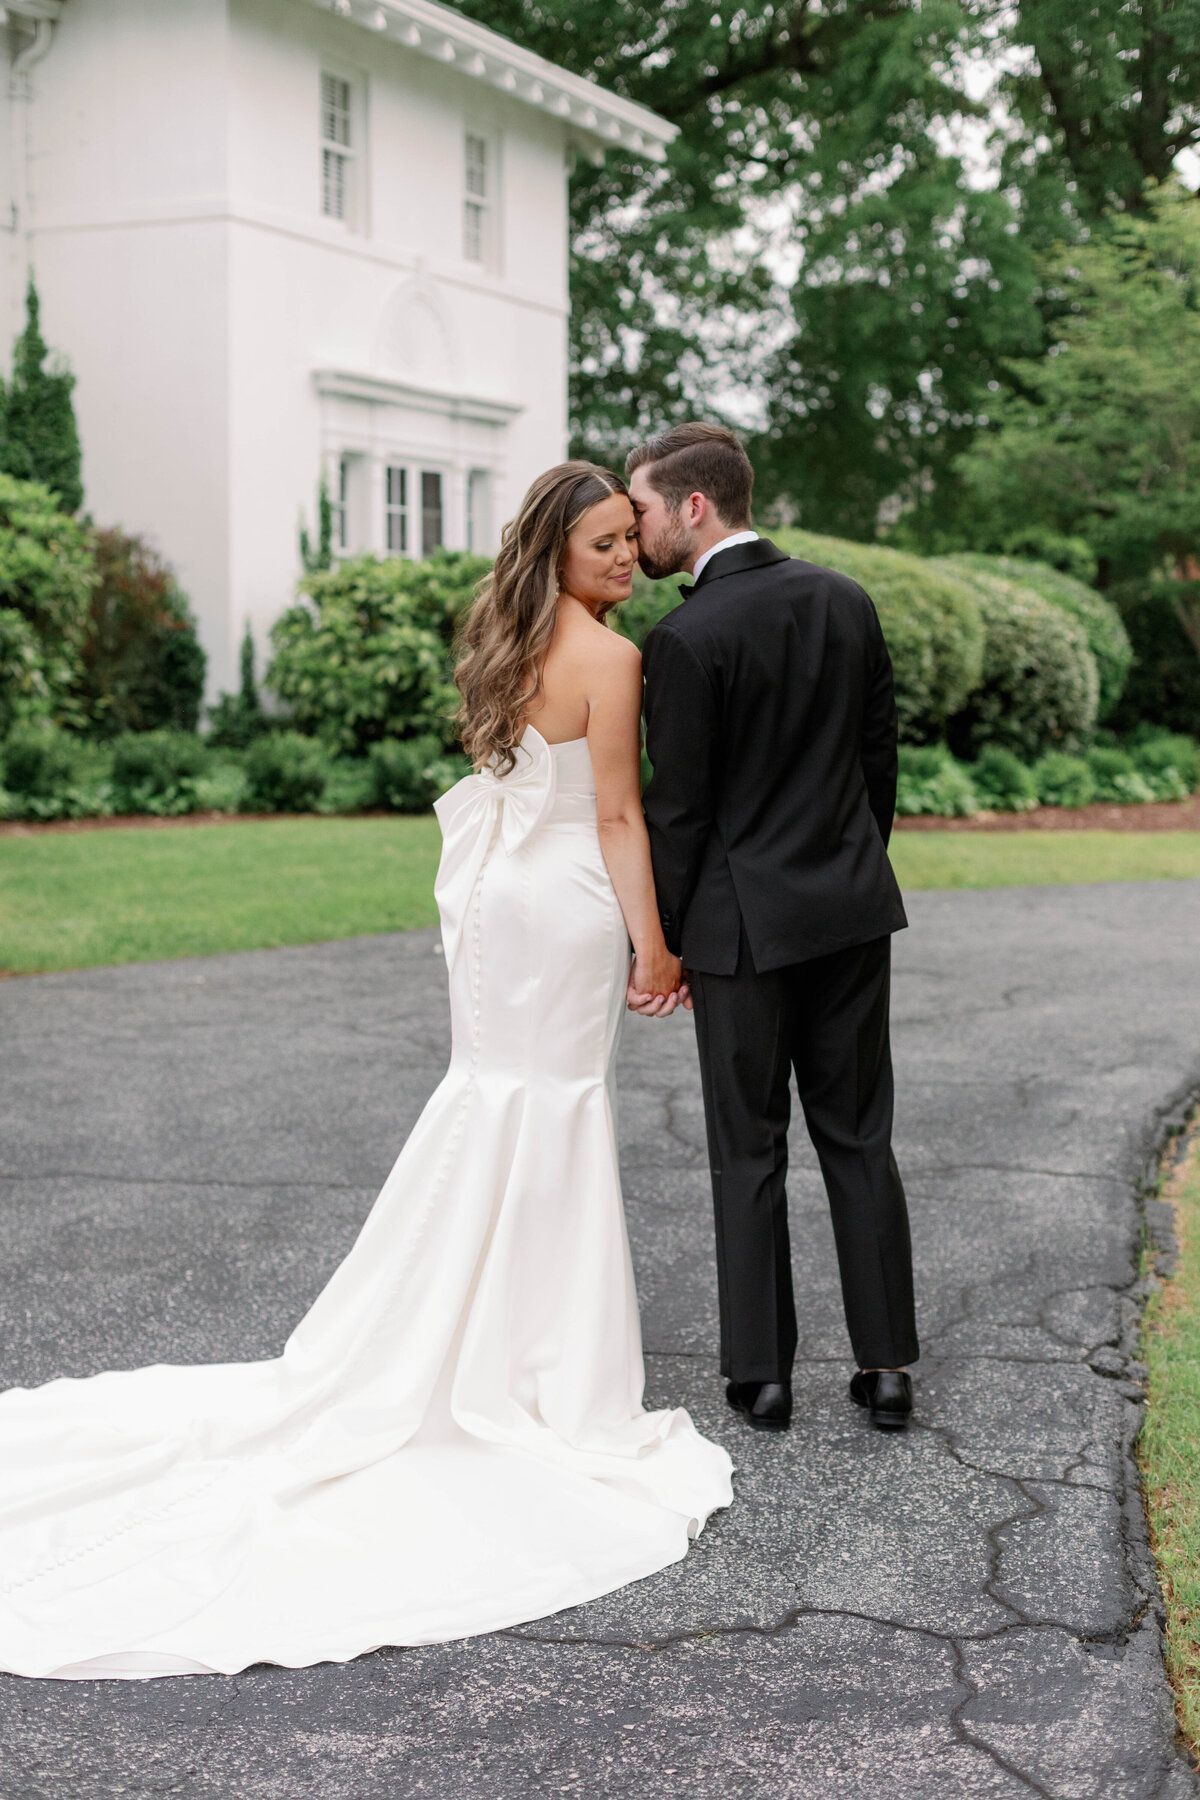 Hayley & Nick - Wedding at The Finch House